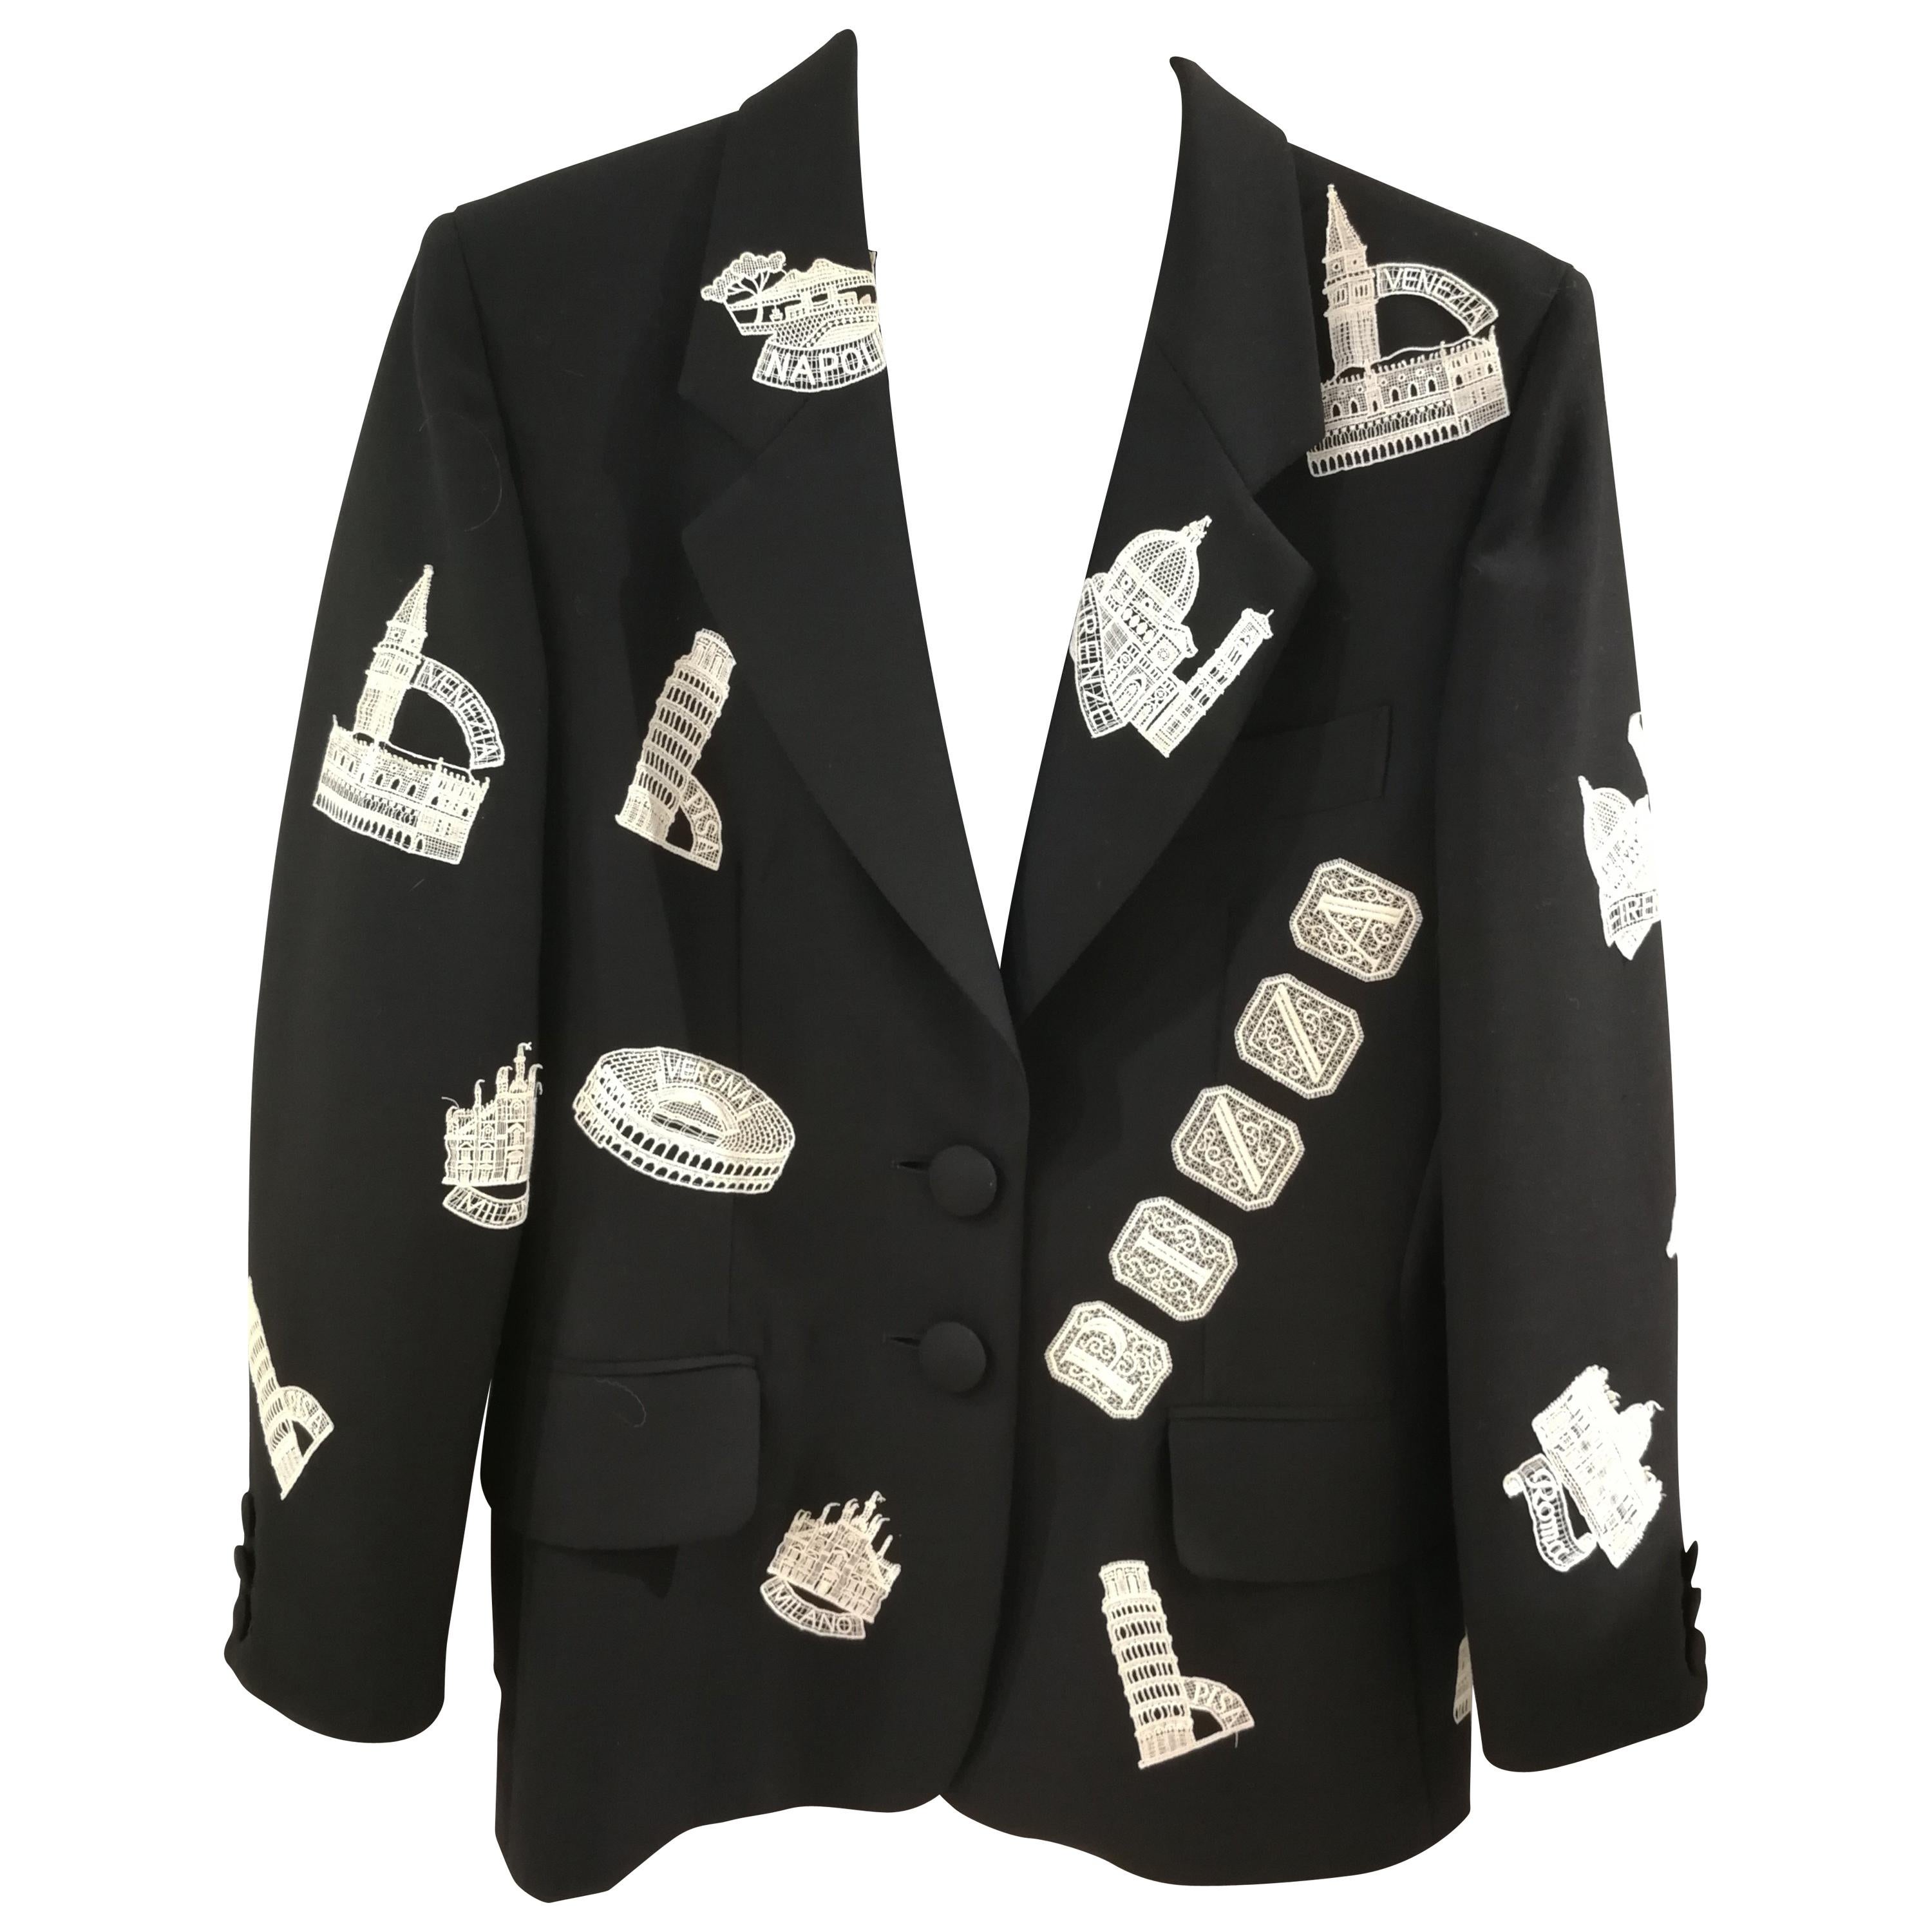 Moschino Couture Cities "Made in Italy" Black Jacket